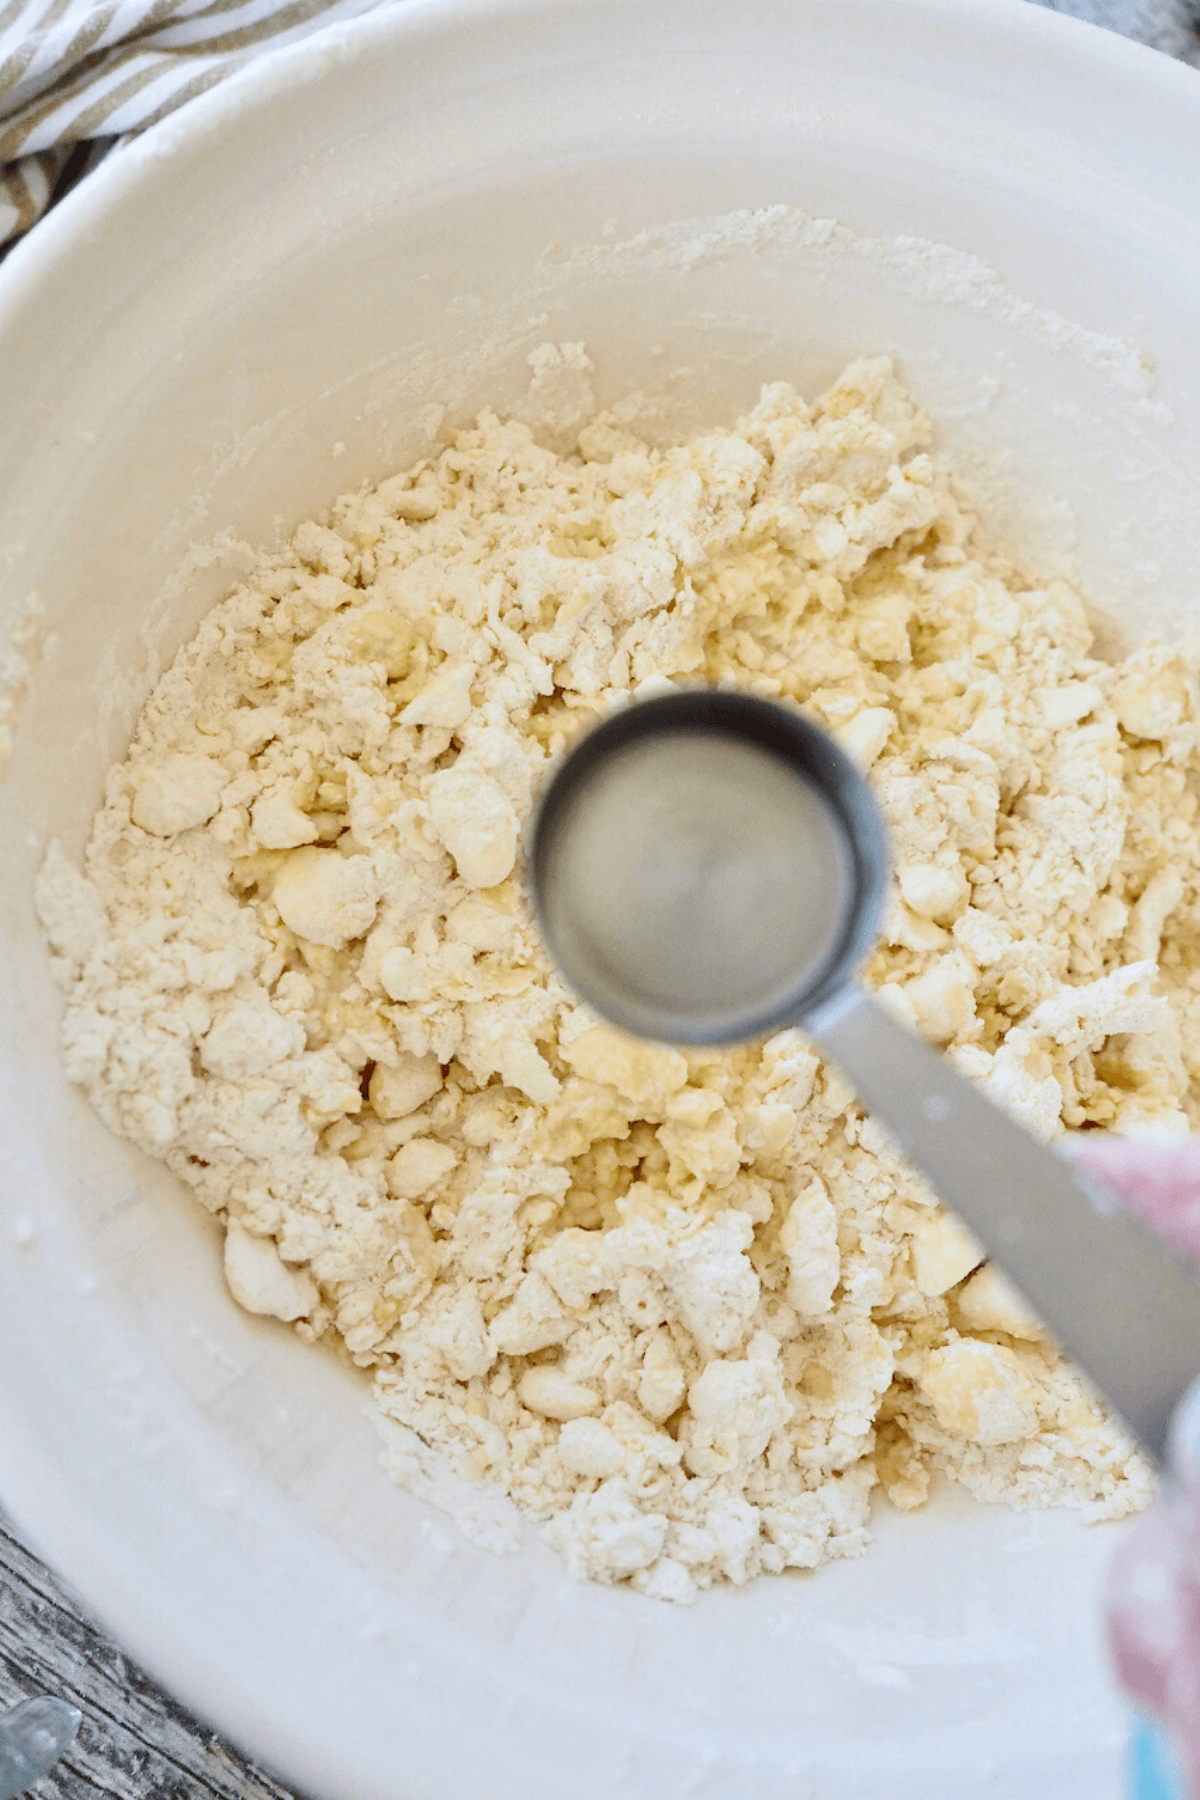 Add ice water to dough, knead until it comes together. 